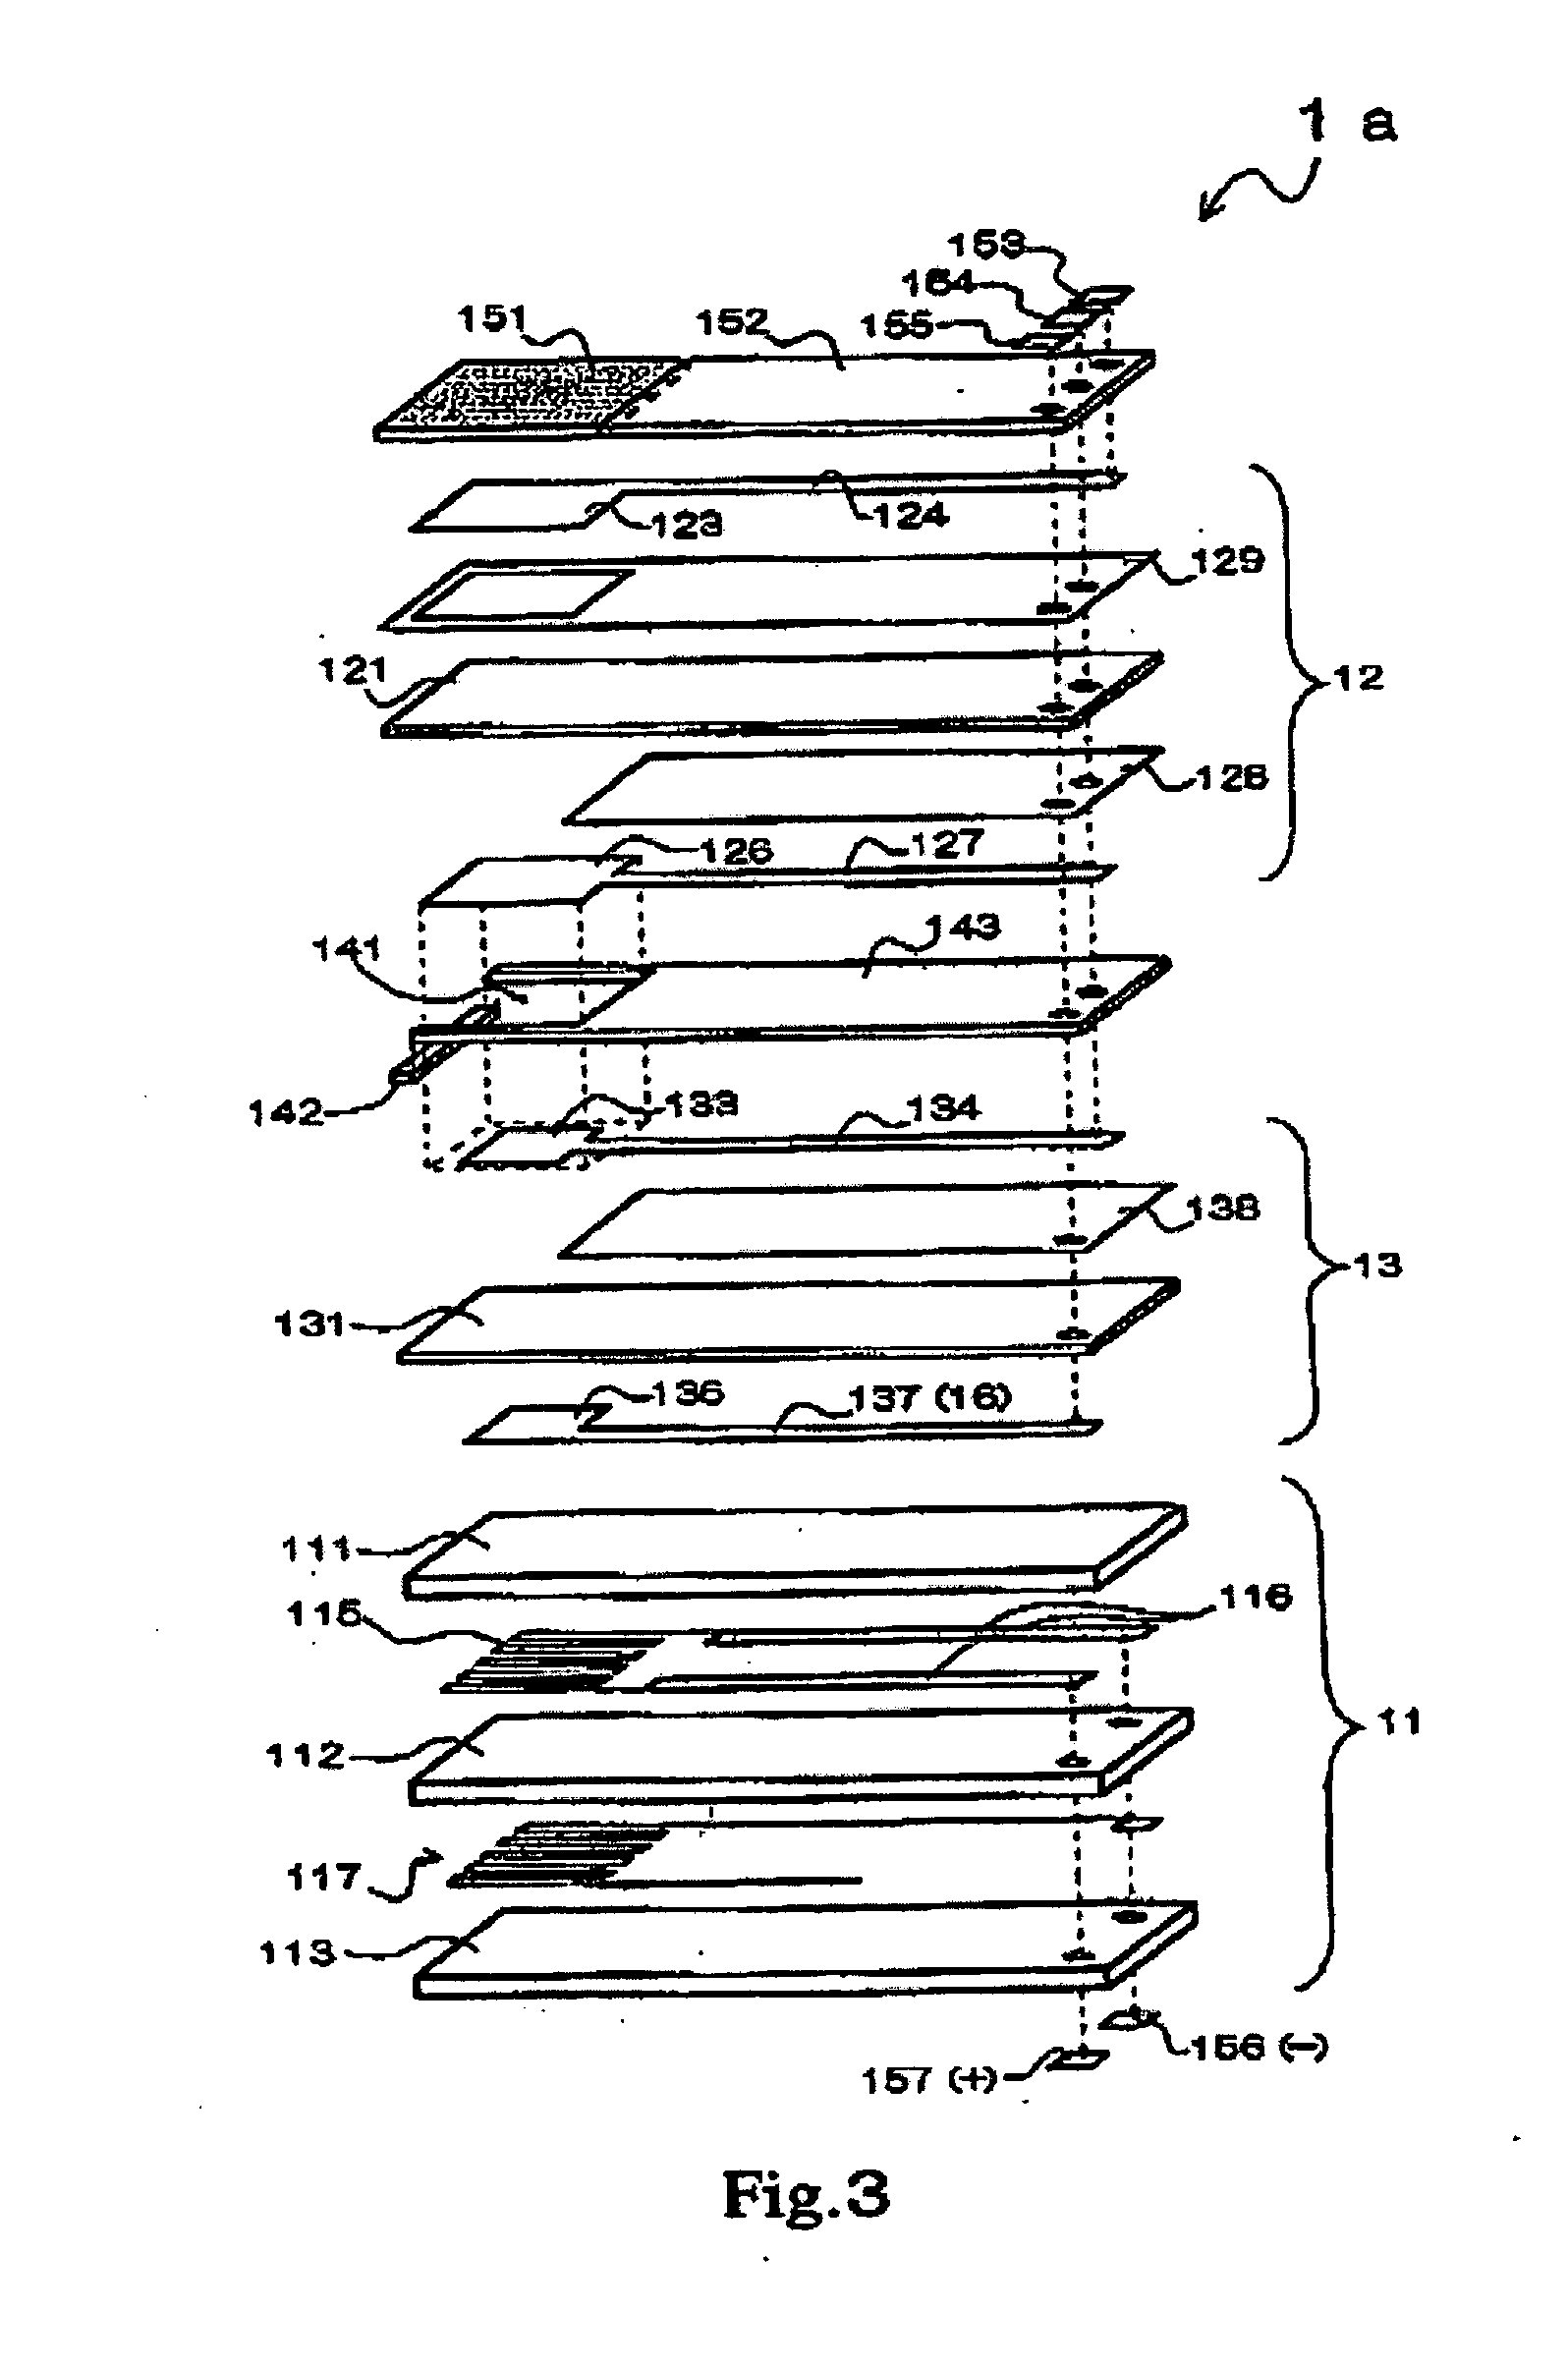 Gas sensor having a laminate comprising solid electrolyte layers and alumina substrate